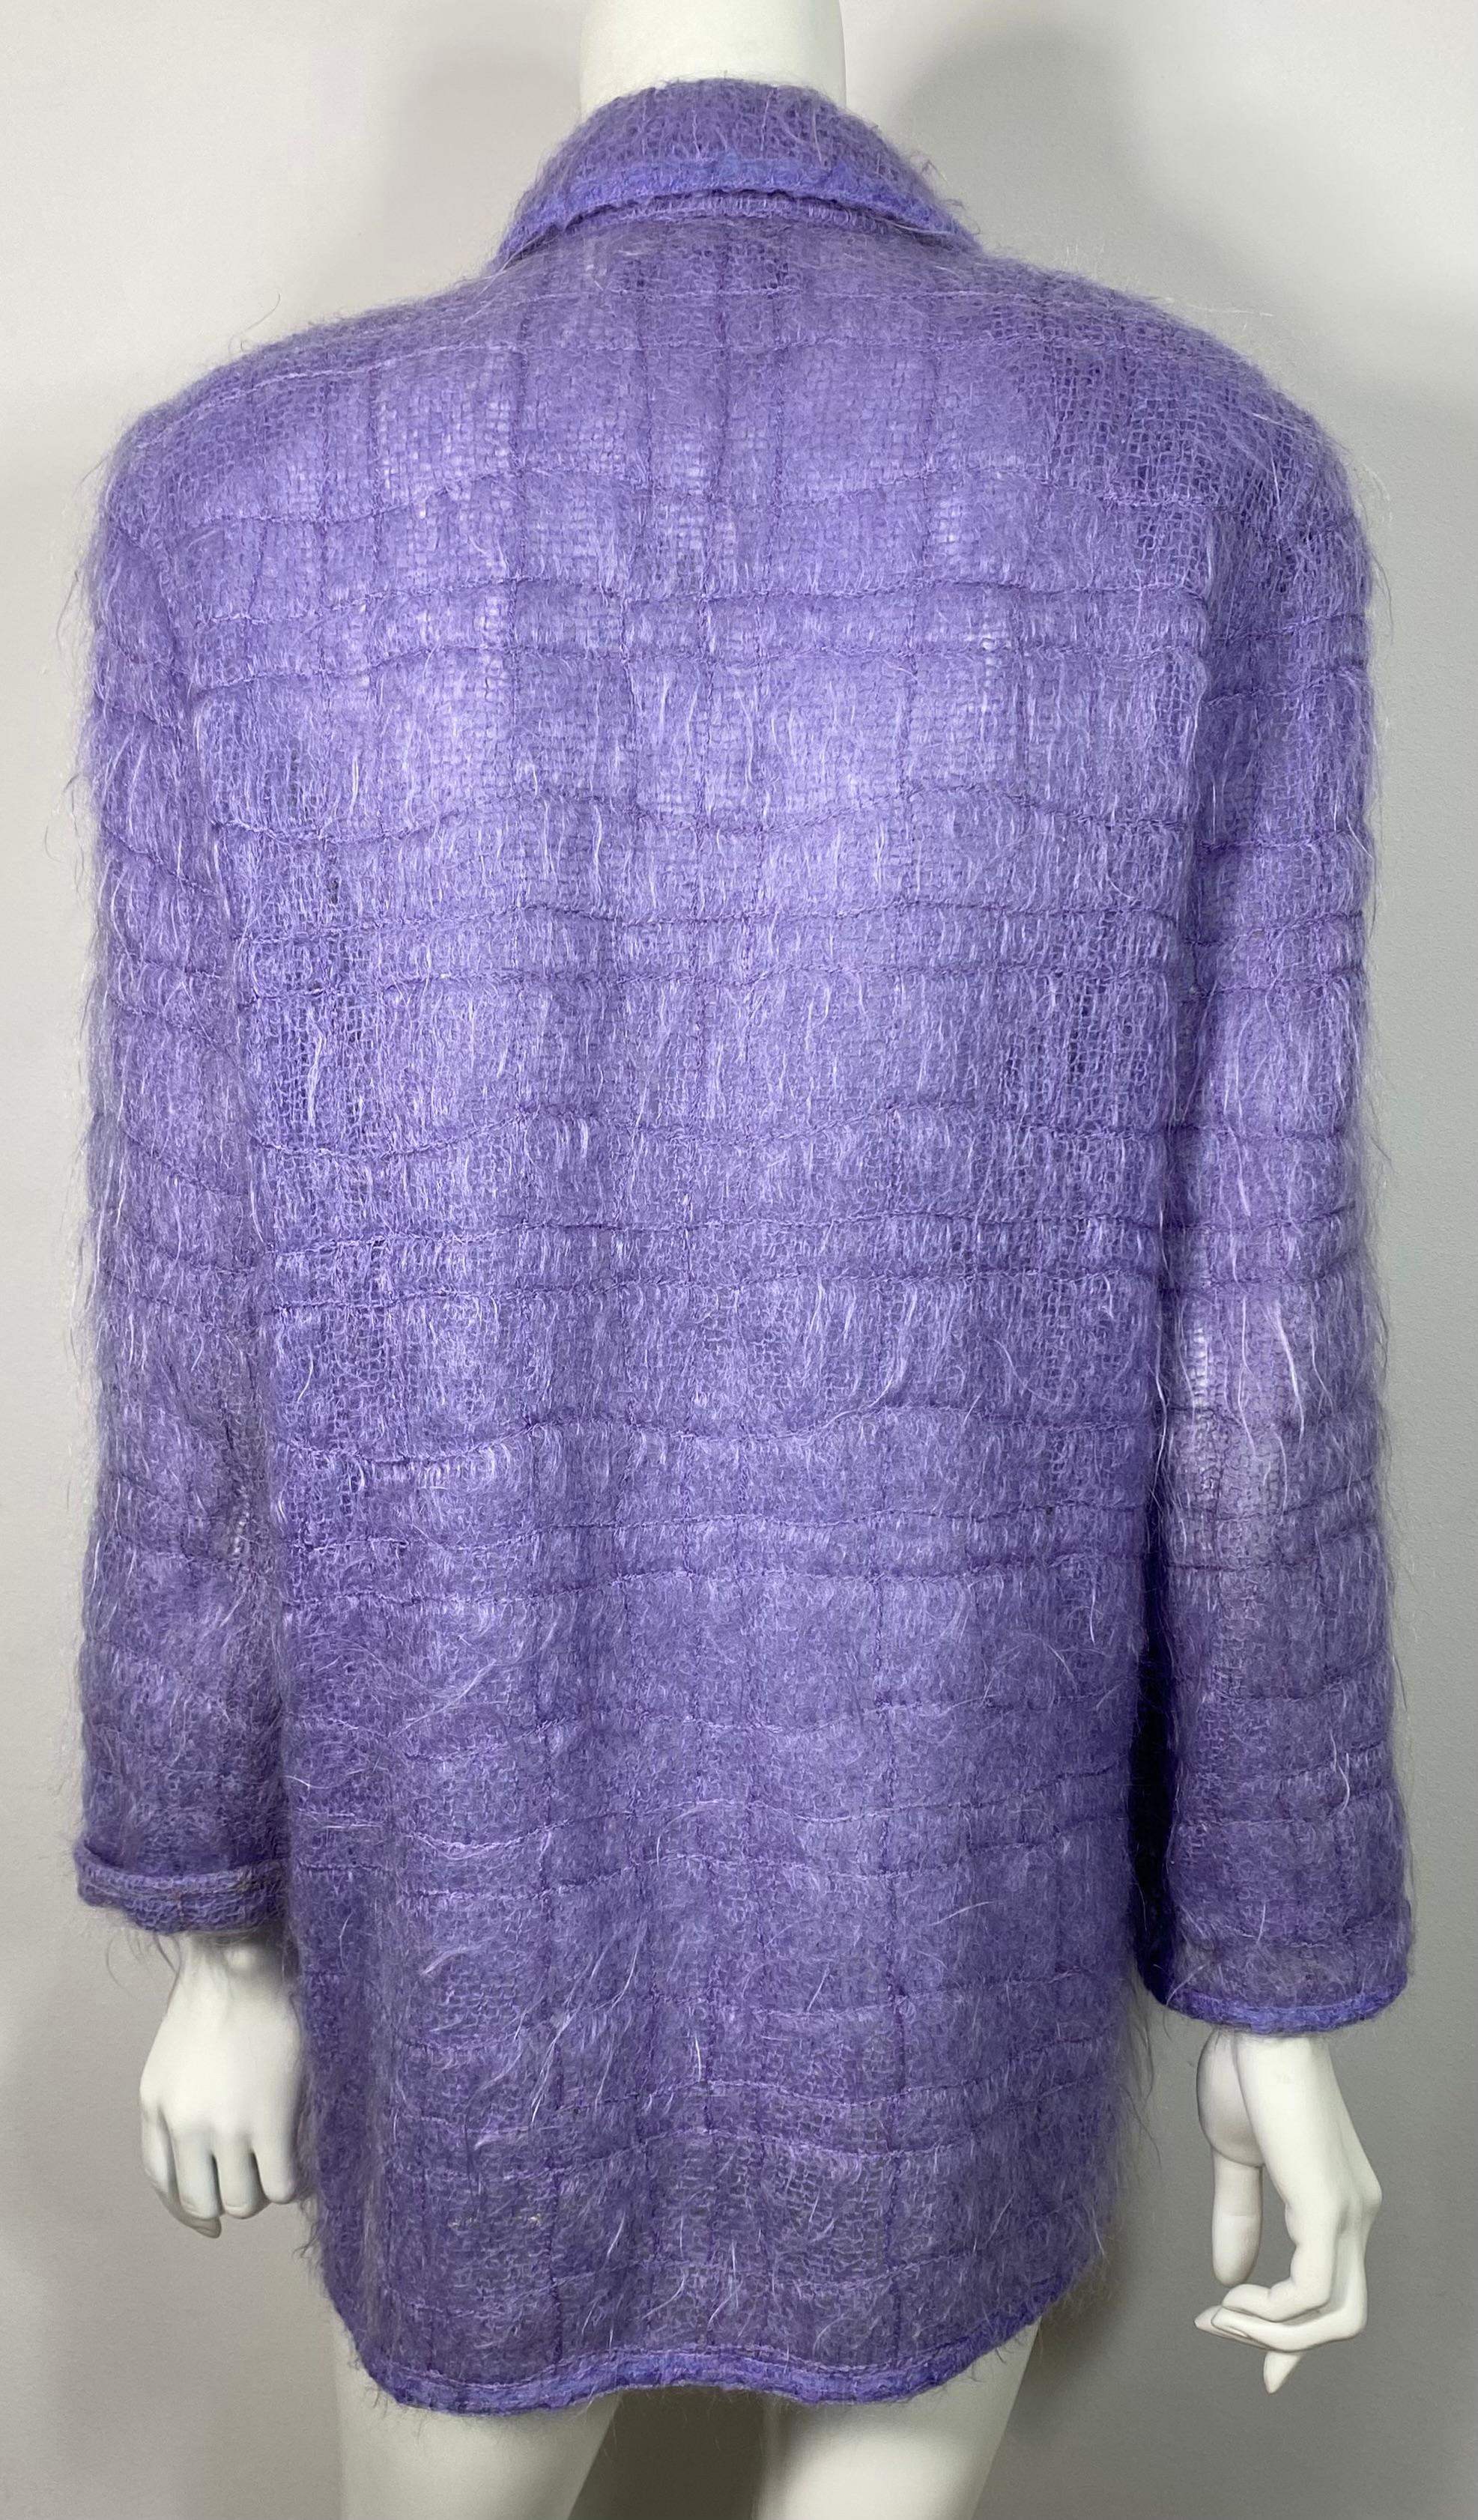 Chanel Runway Fall 1998 Lavender Mohair Jacket - Size 36 For Sale 5